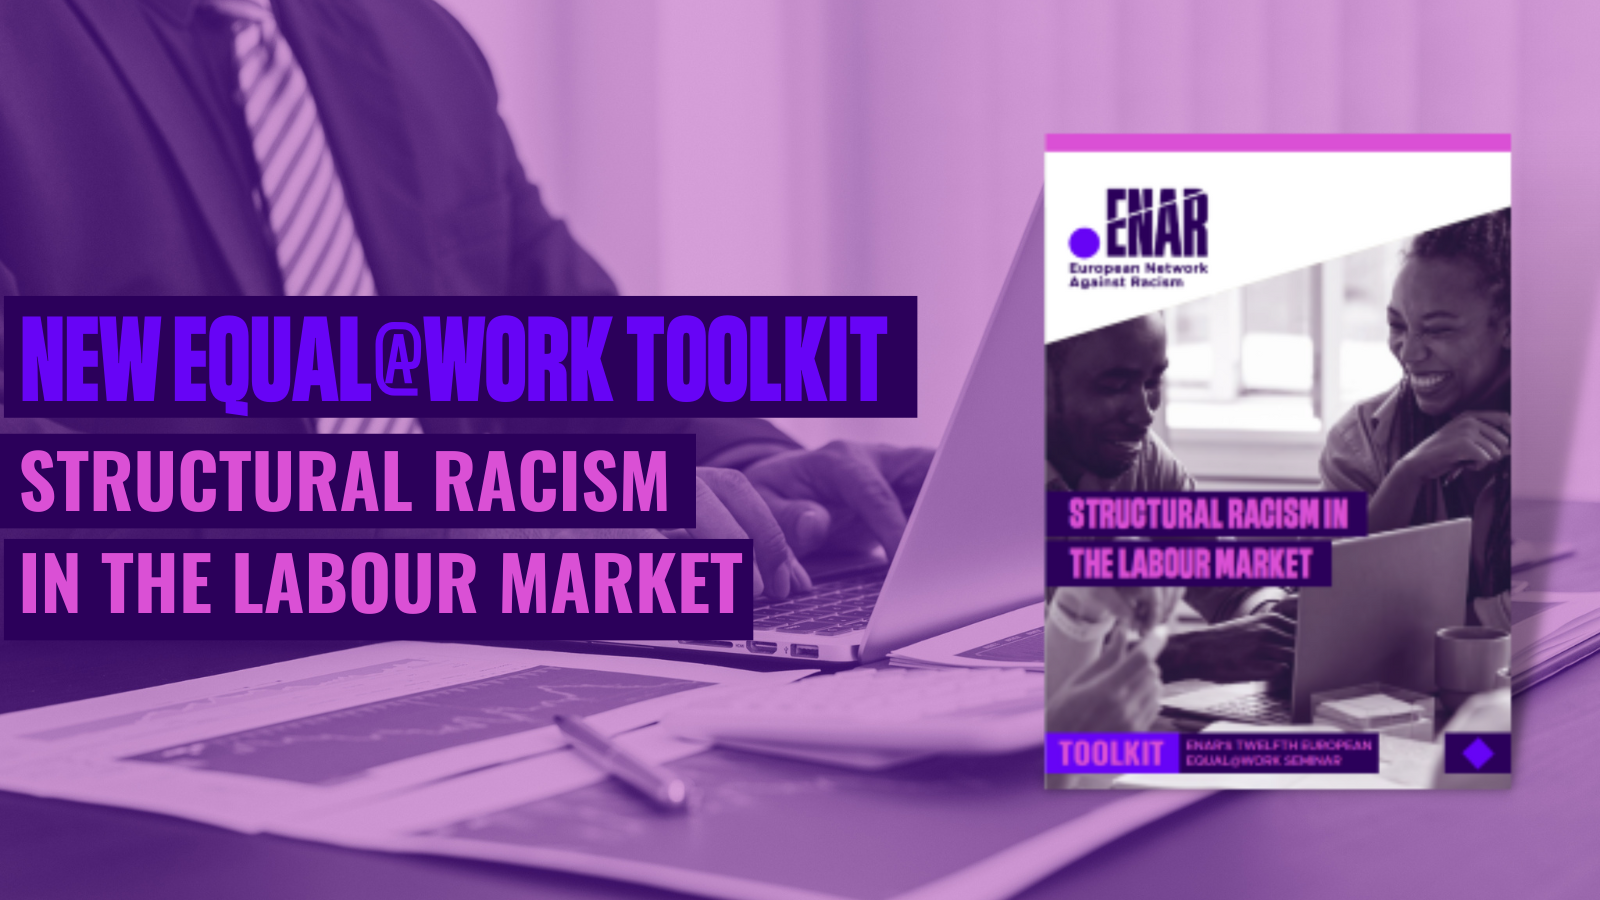 Equal@Work ToolKit Structural Racism in the Labour Market